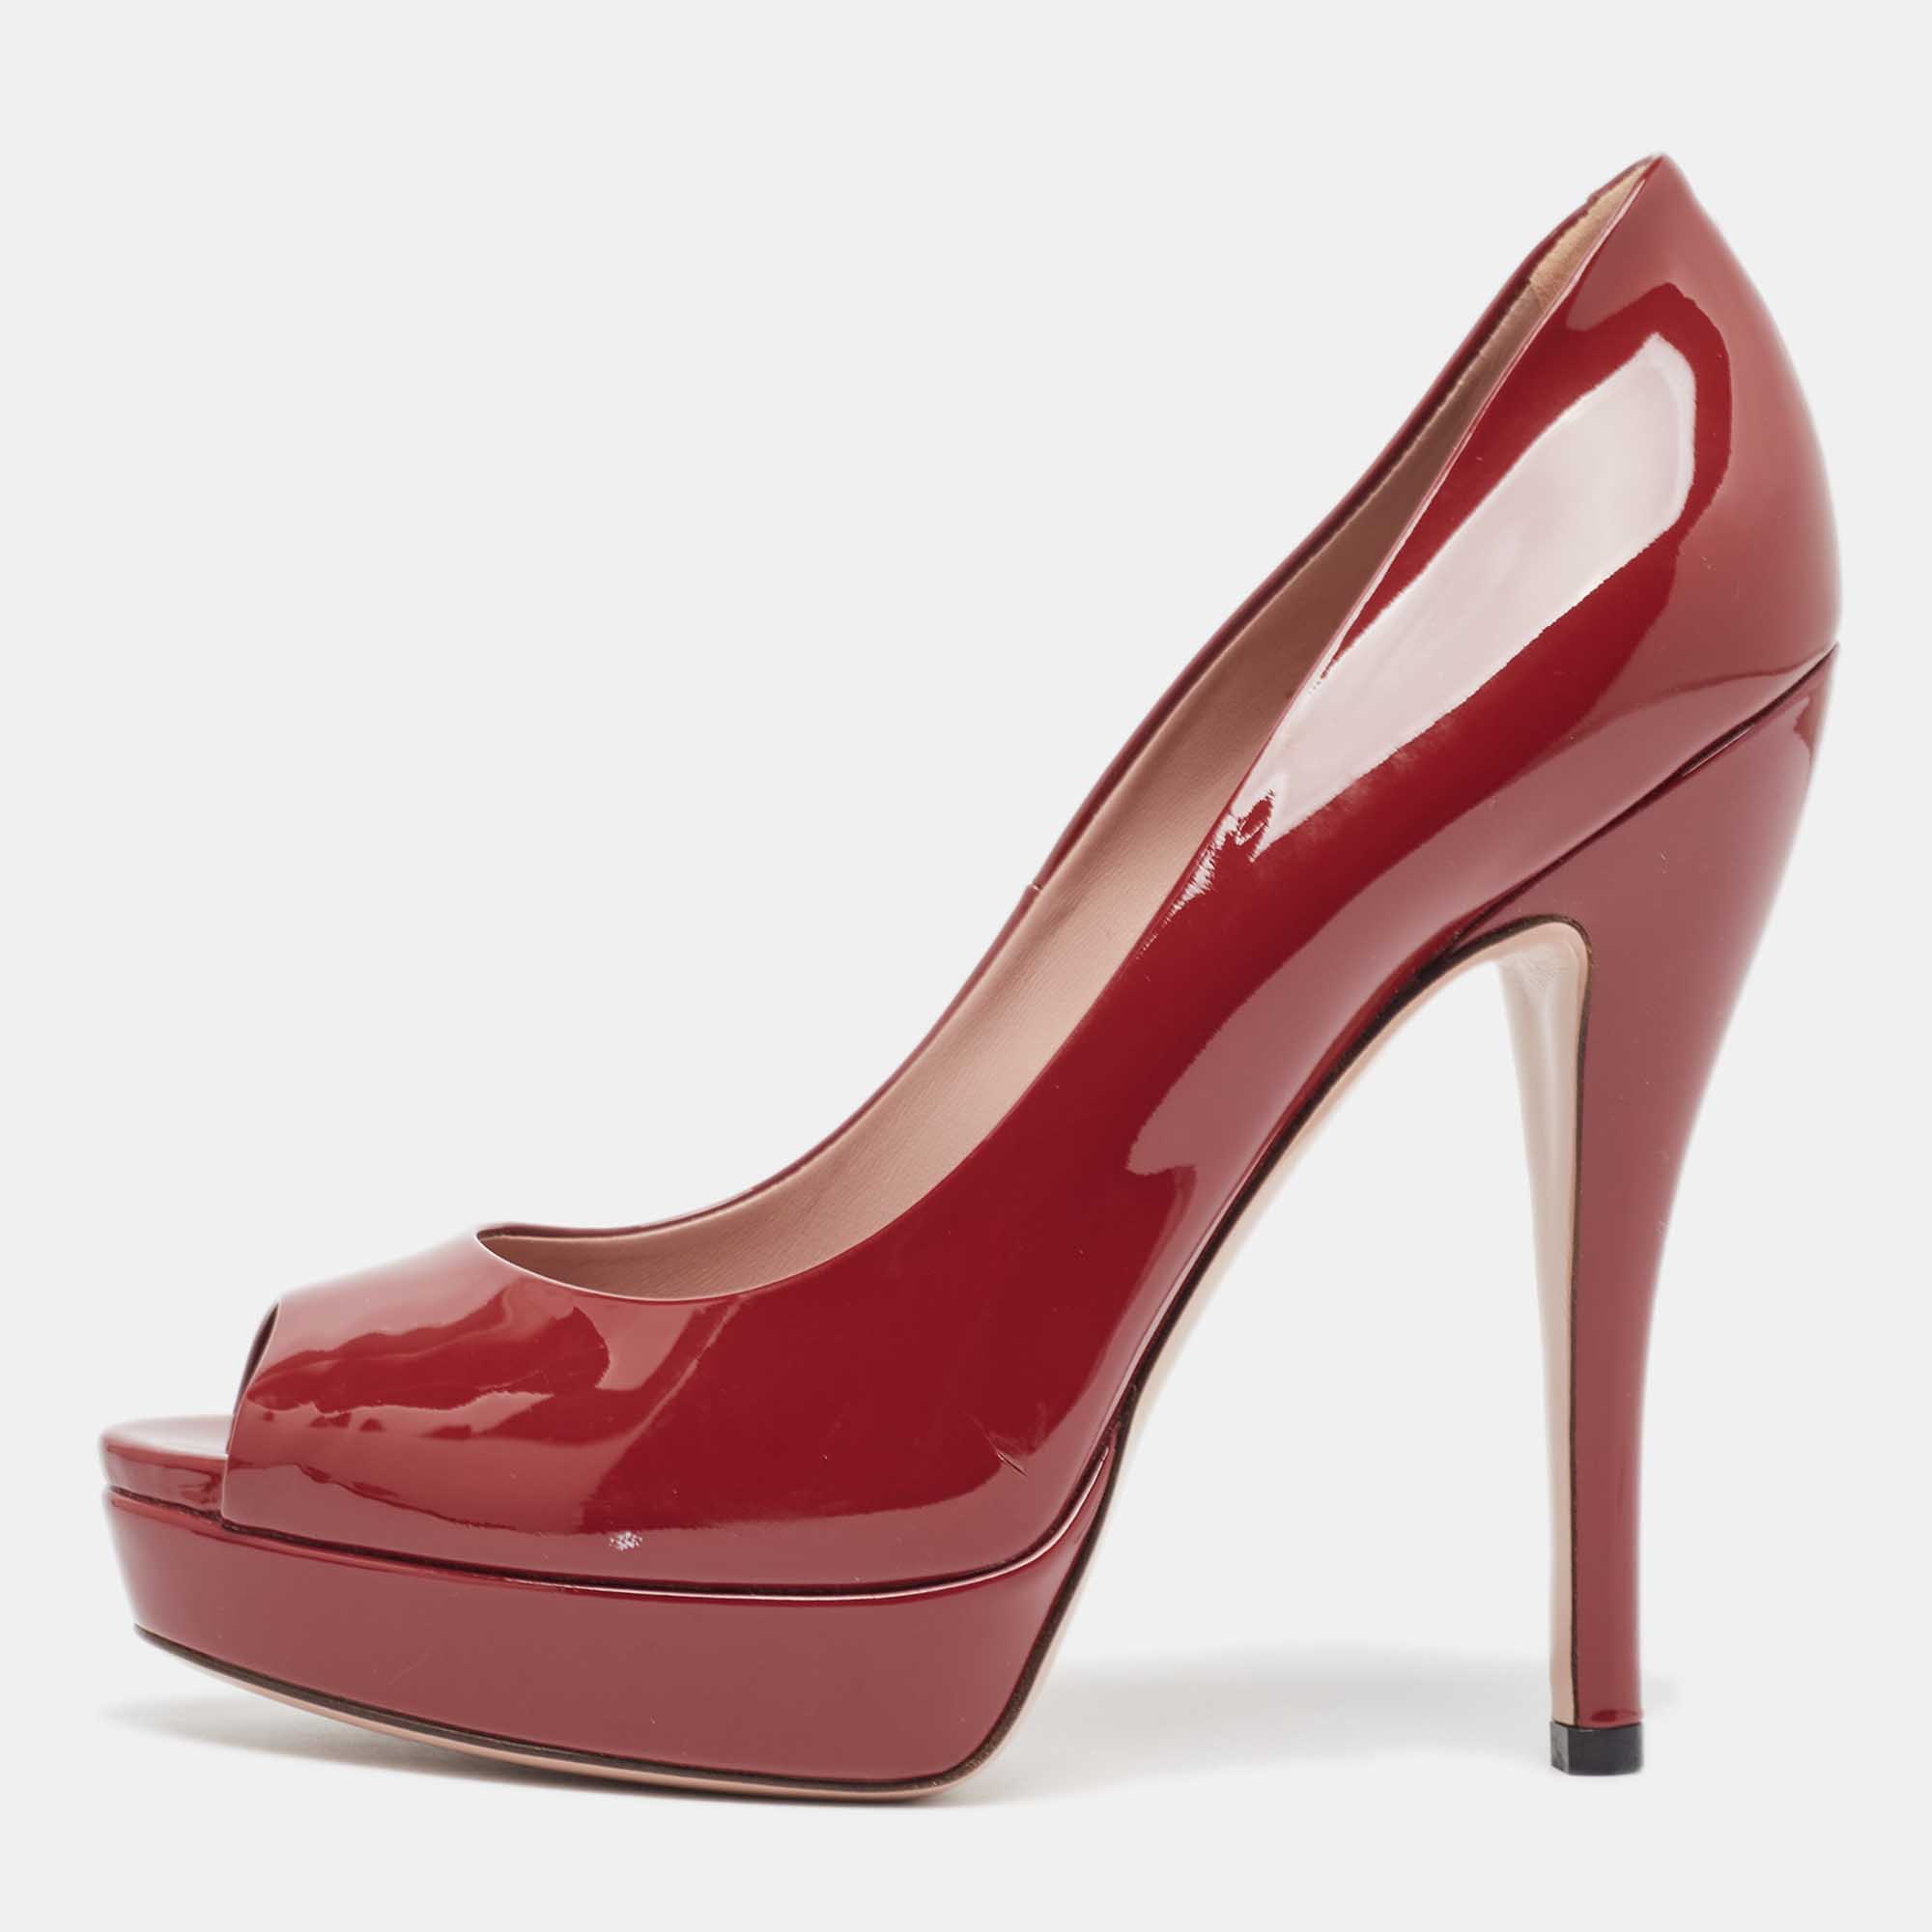 Gucci red patent leather peep toe pumps size 37